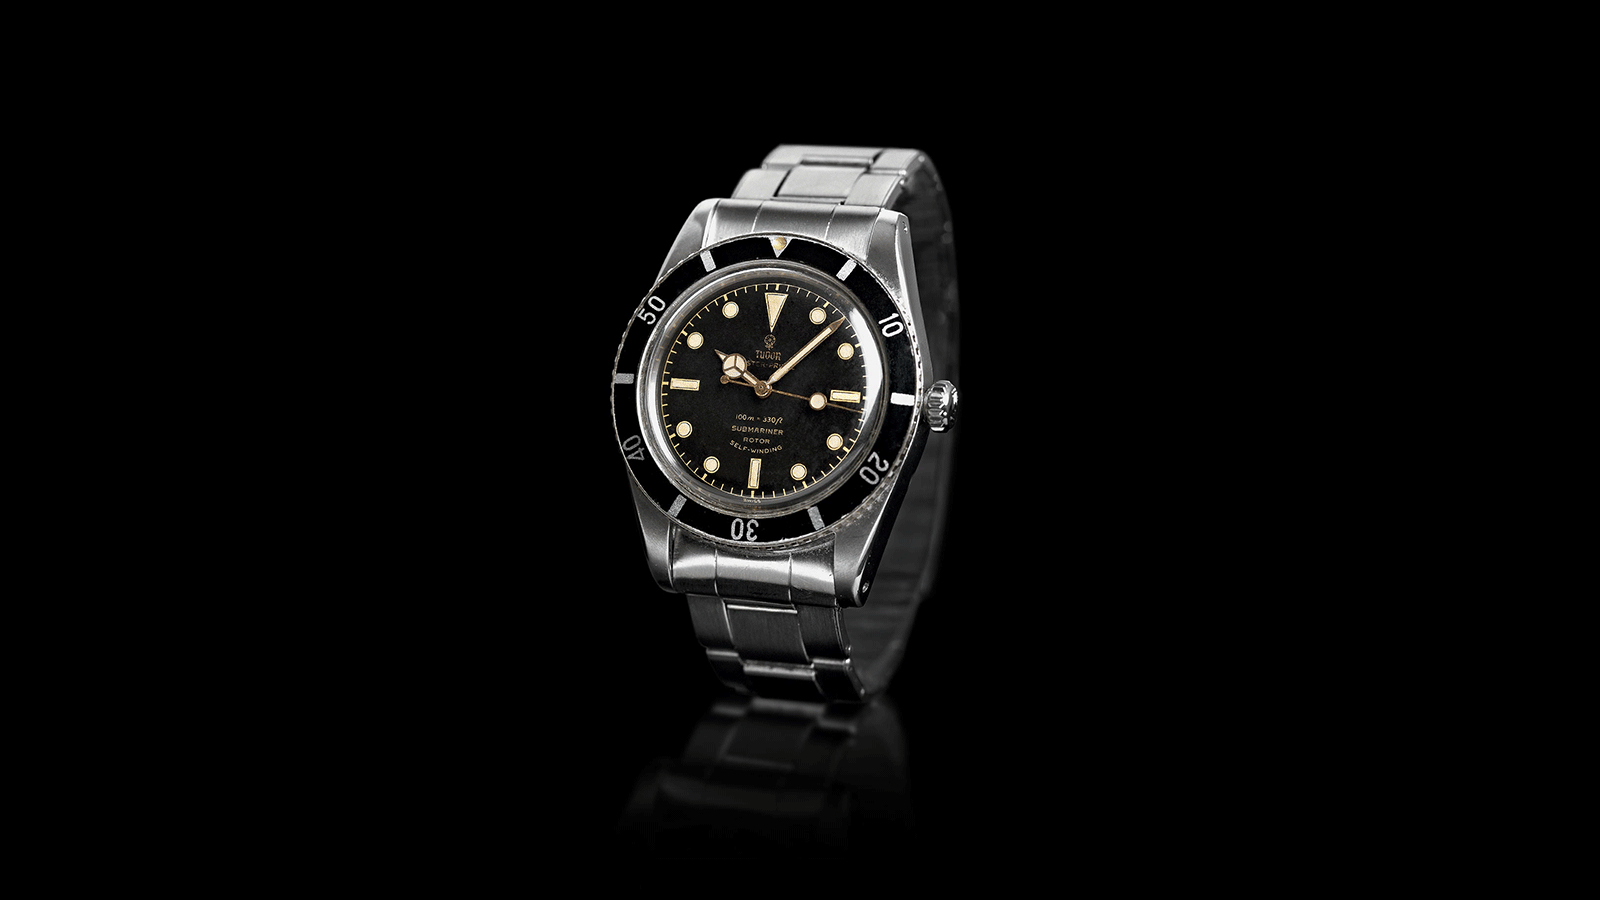 The first TUDOR divers’ watch was presented in 1954. It bore the name TUDOR Oyster Prince Submariner, reference 7922. 